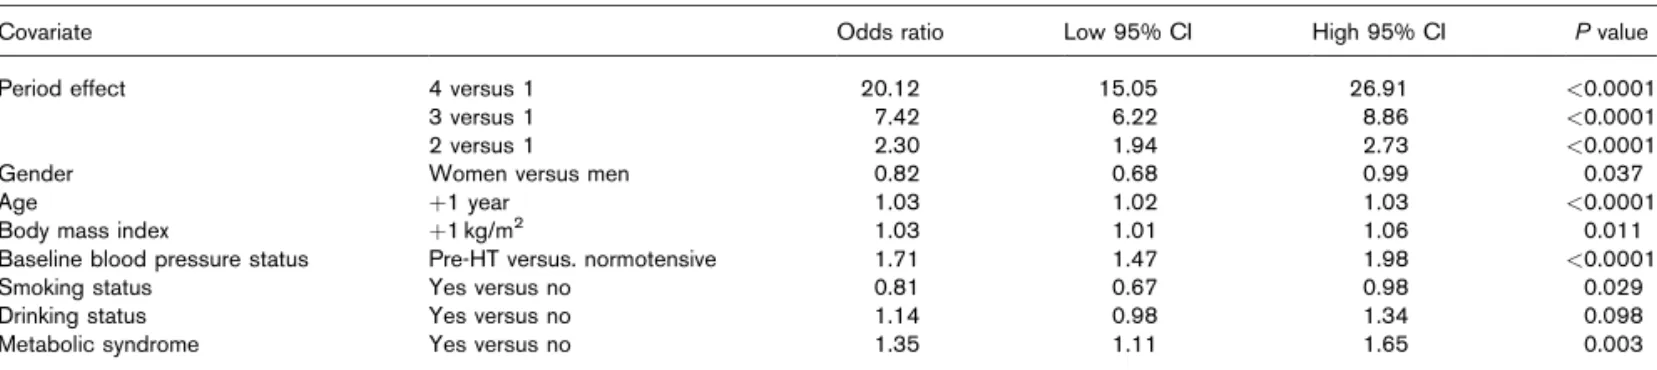 Table 2 Odds ratios for development of hypertension in the Chin-Shan Community Cardiovascular Cohort (CCCC) study, Taiwan